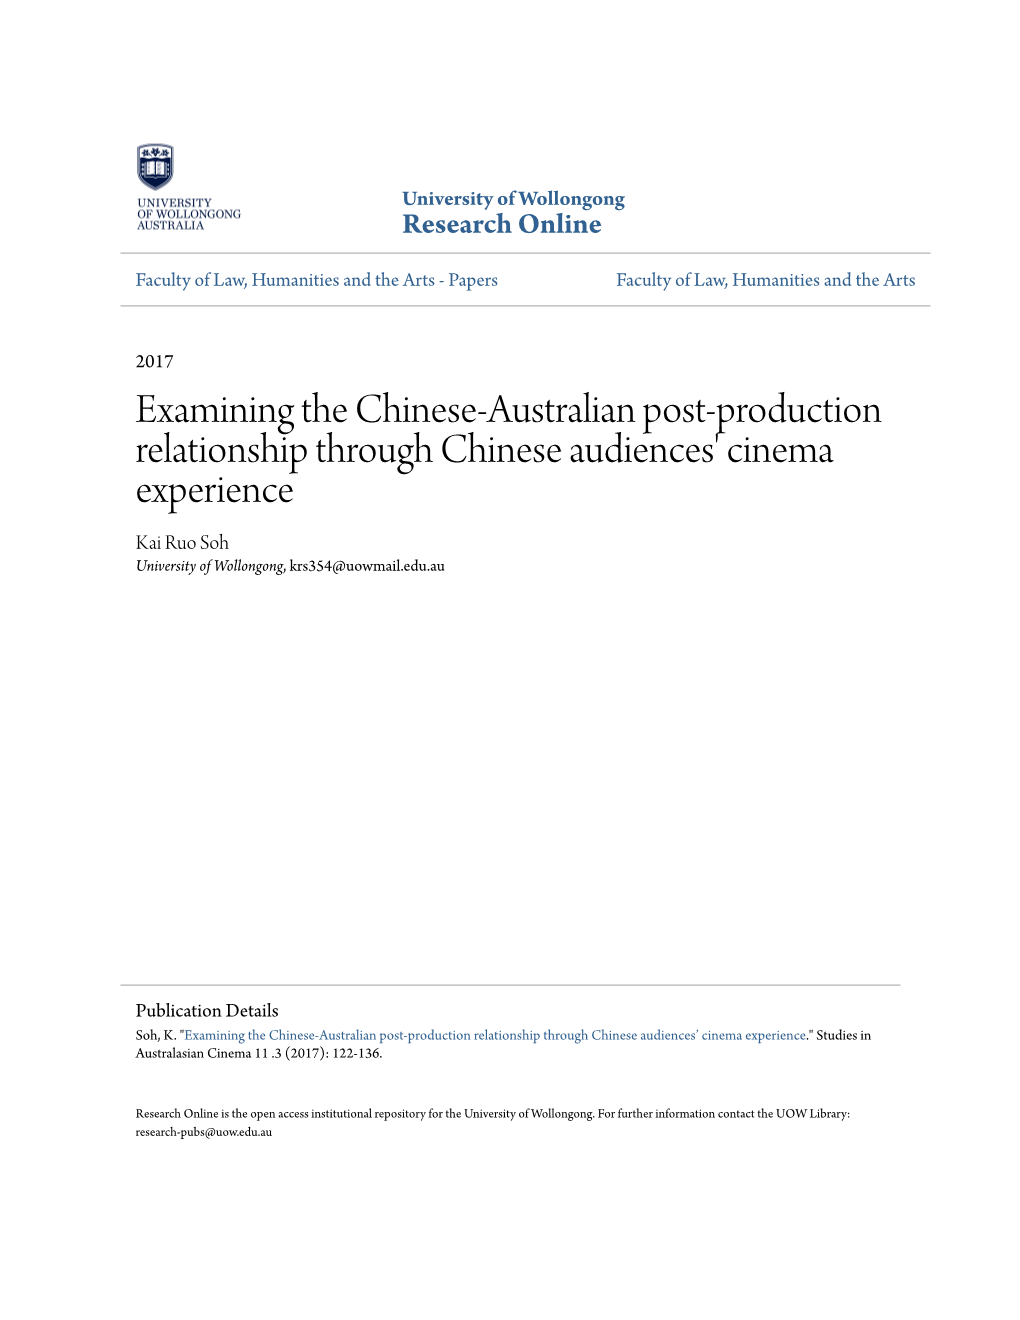 Examining the Chinese-Australian Post-Production Relationship Through Chinese Audiences' Cinema Experience Kai Ruo Soh University of Wollongong, Krs354@Uowmail.Edu.Au